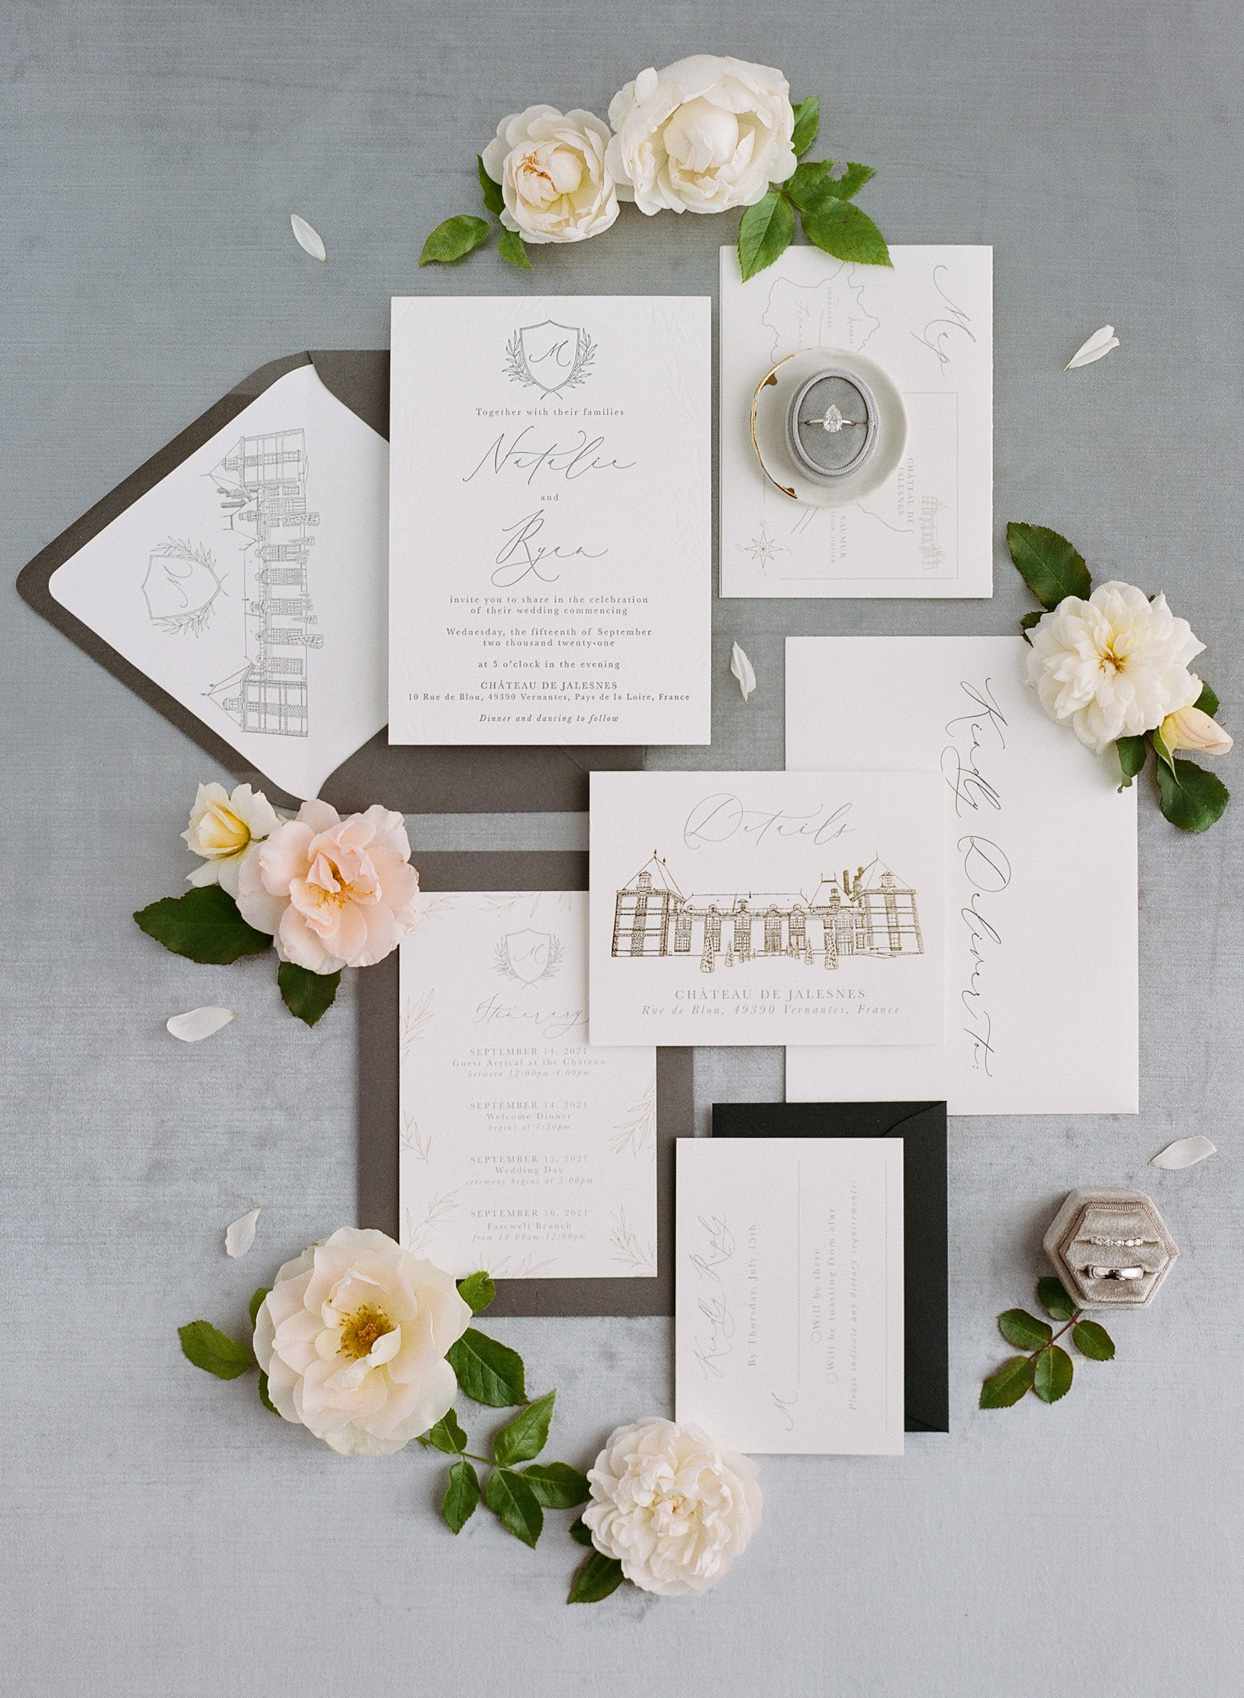 wedding invitation suite with hand-drawn illustrations